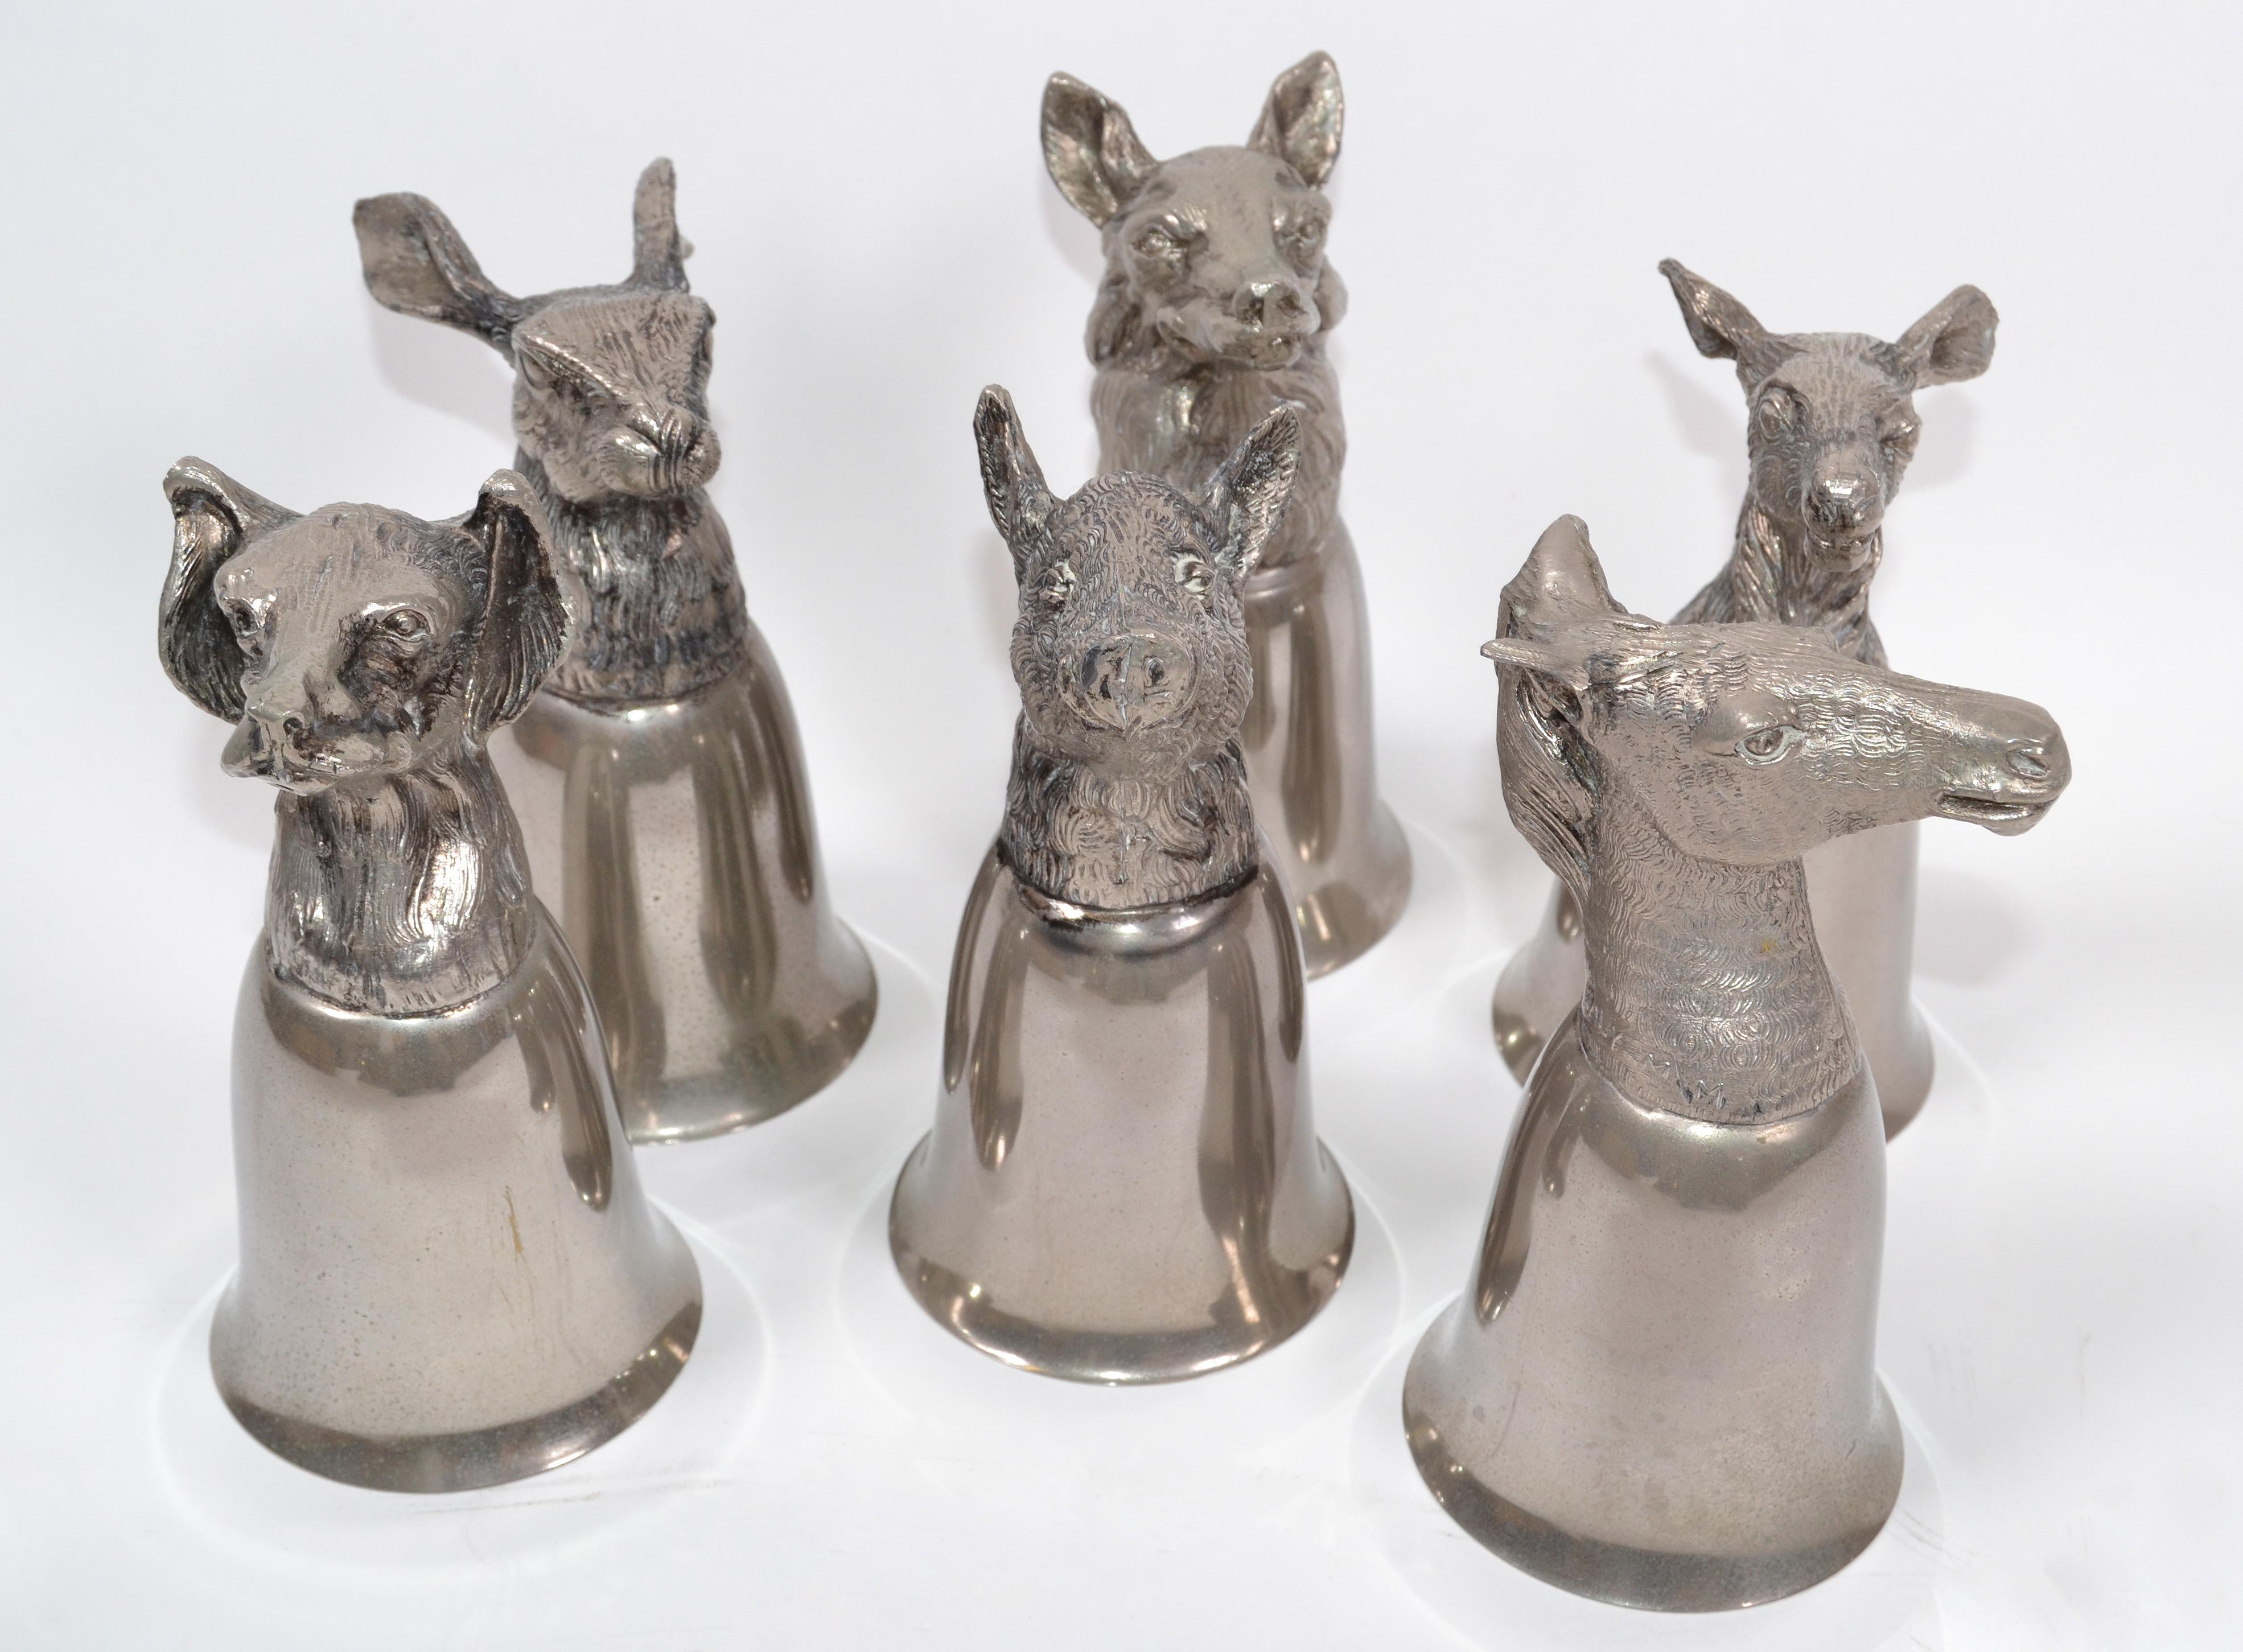 Six Mauro Manetti silver plate animal heads stirrup, goblets, cups, made in Italy.
We have the Hunting collection of a German shepherd, Labrador, sheep, rabbit, donkey, boar.
All marked MM Italy.